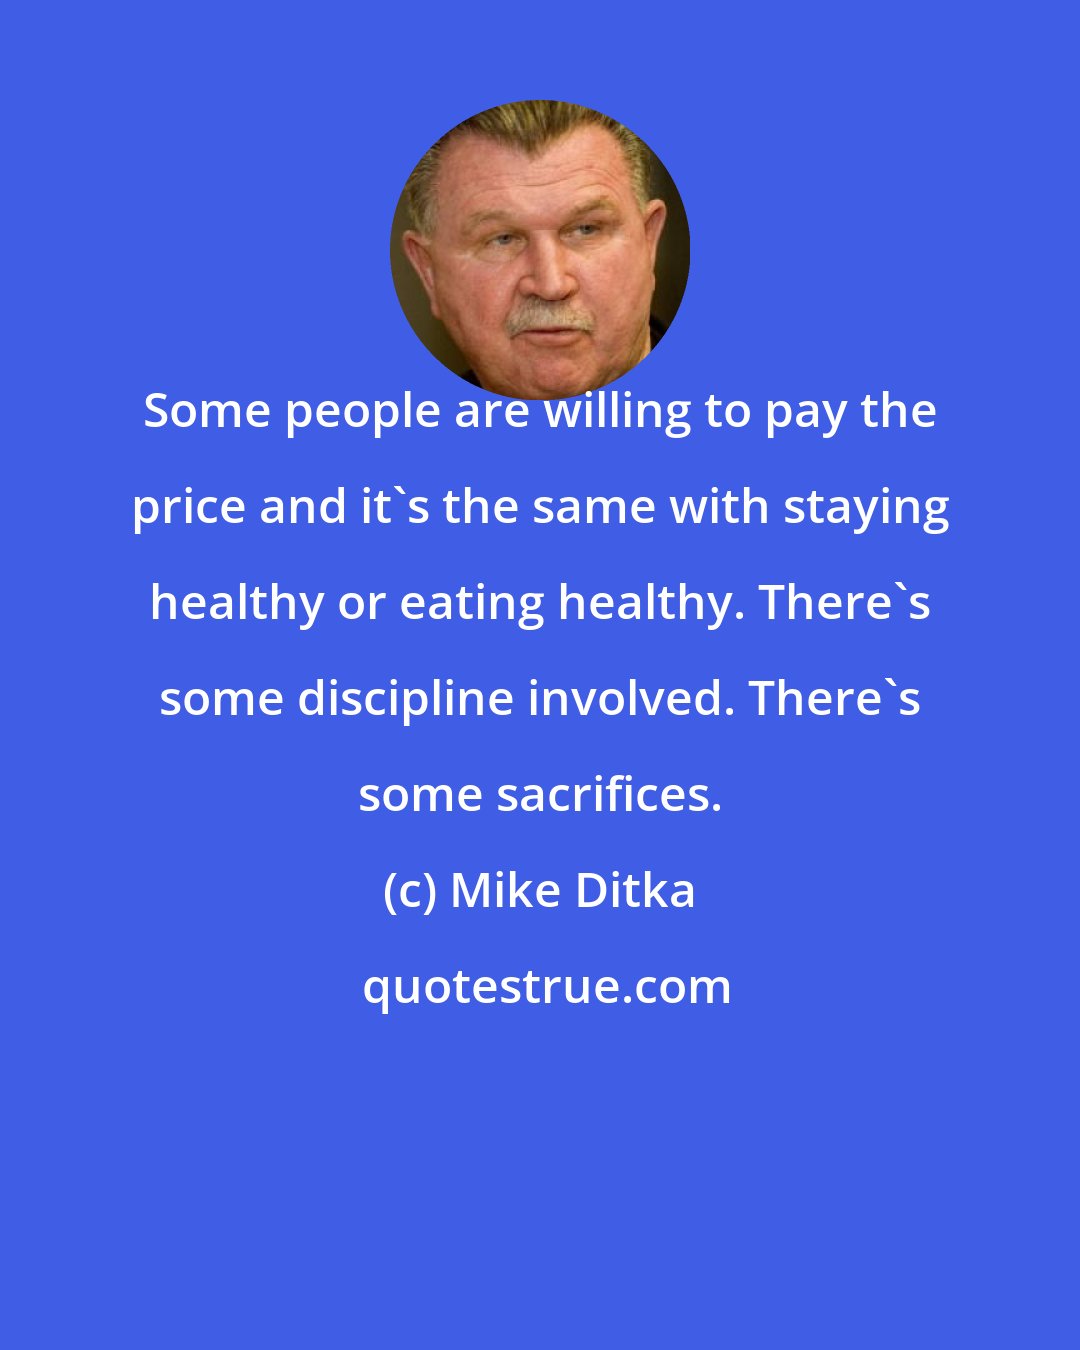 Mike Ditka: Some people are willing to pay the price and it's the same with staying healthy or eating healthy. There's some discipline involved. There's some sacrifices.